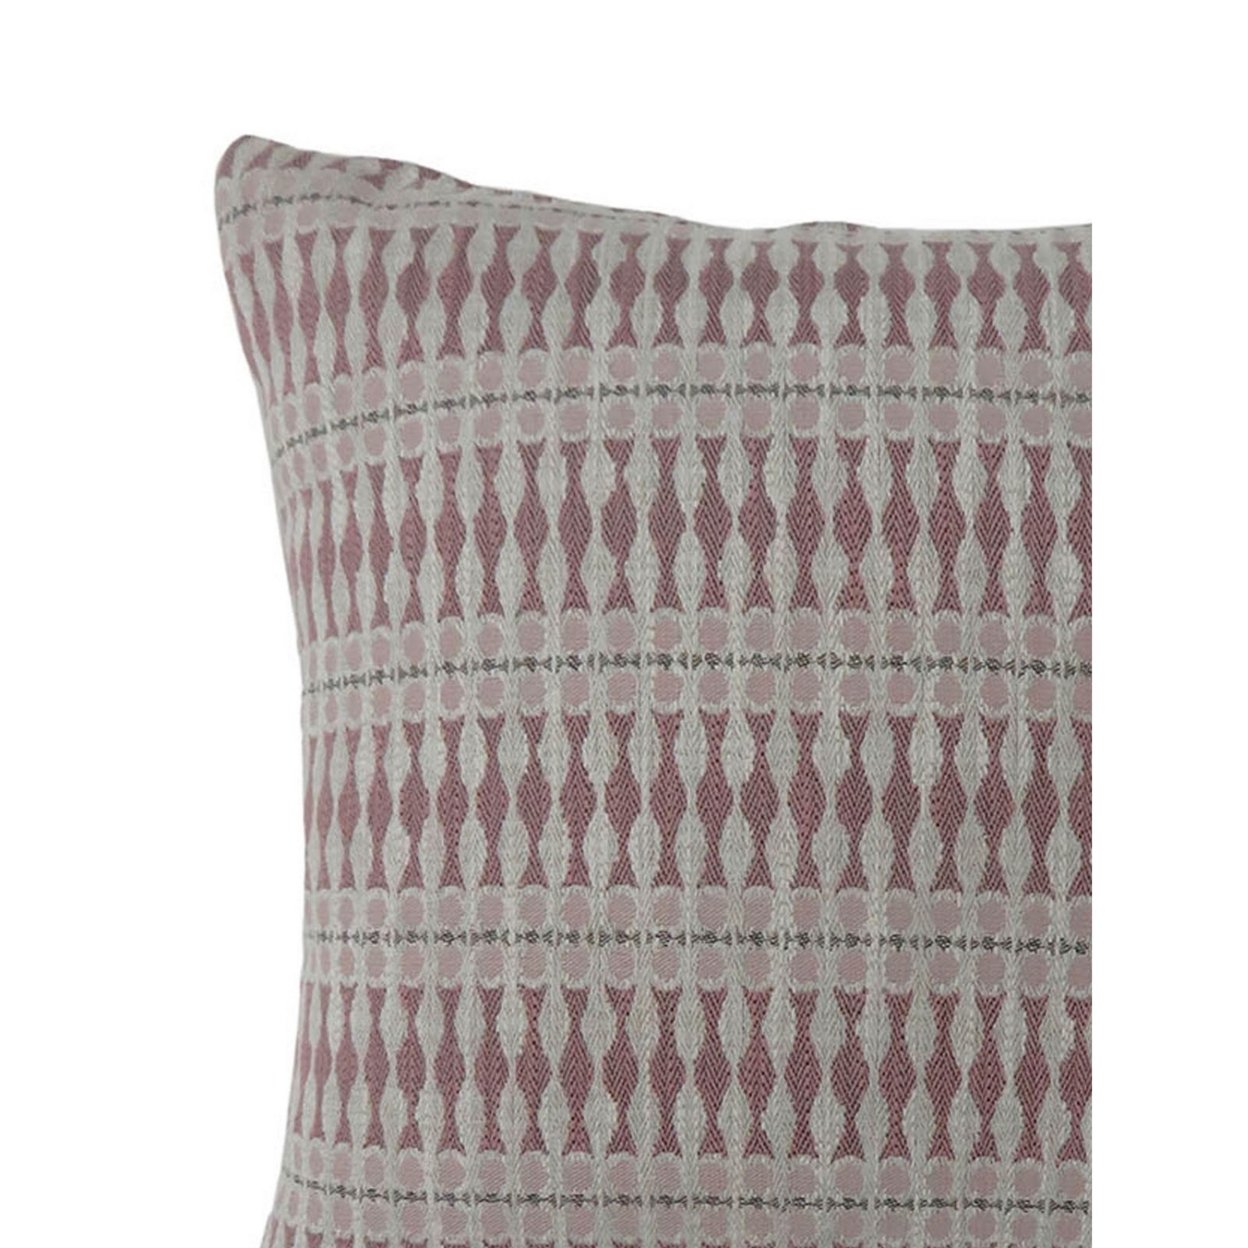 22 Inch Throw Pillow, Set Of 2, Tribal Design Pattern Polyester Fabric, Gray, Red